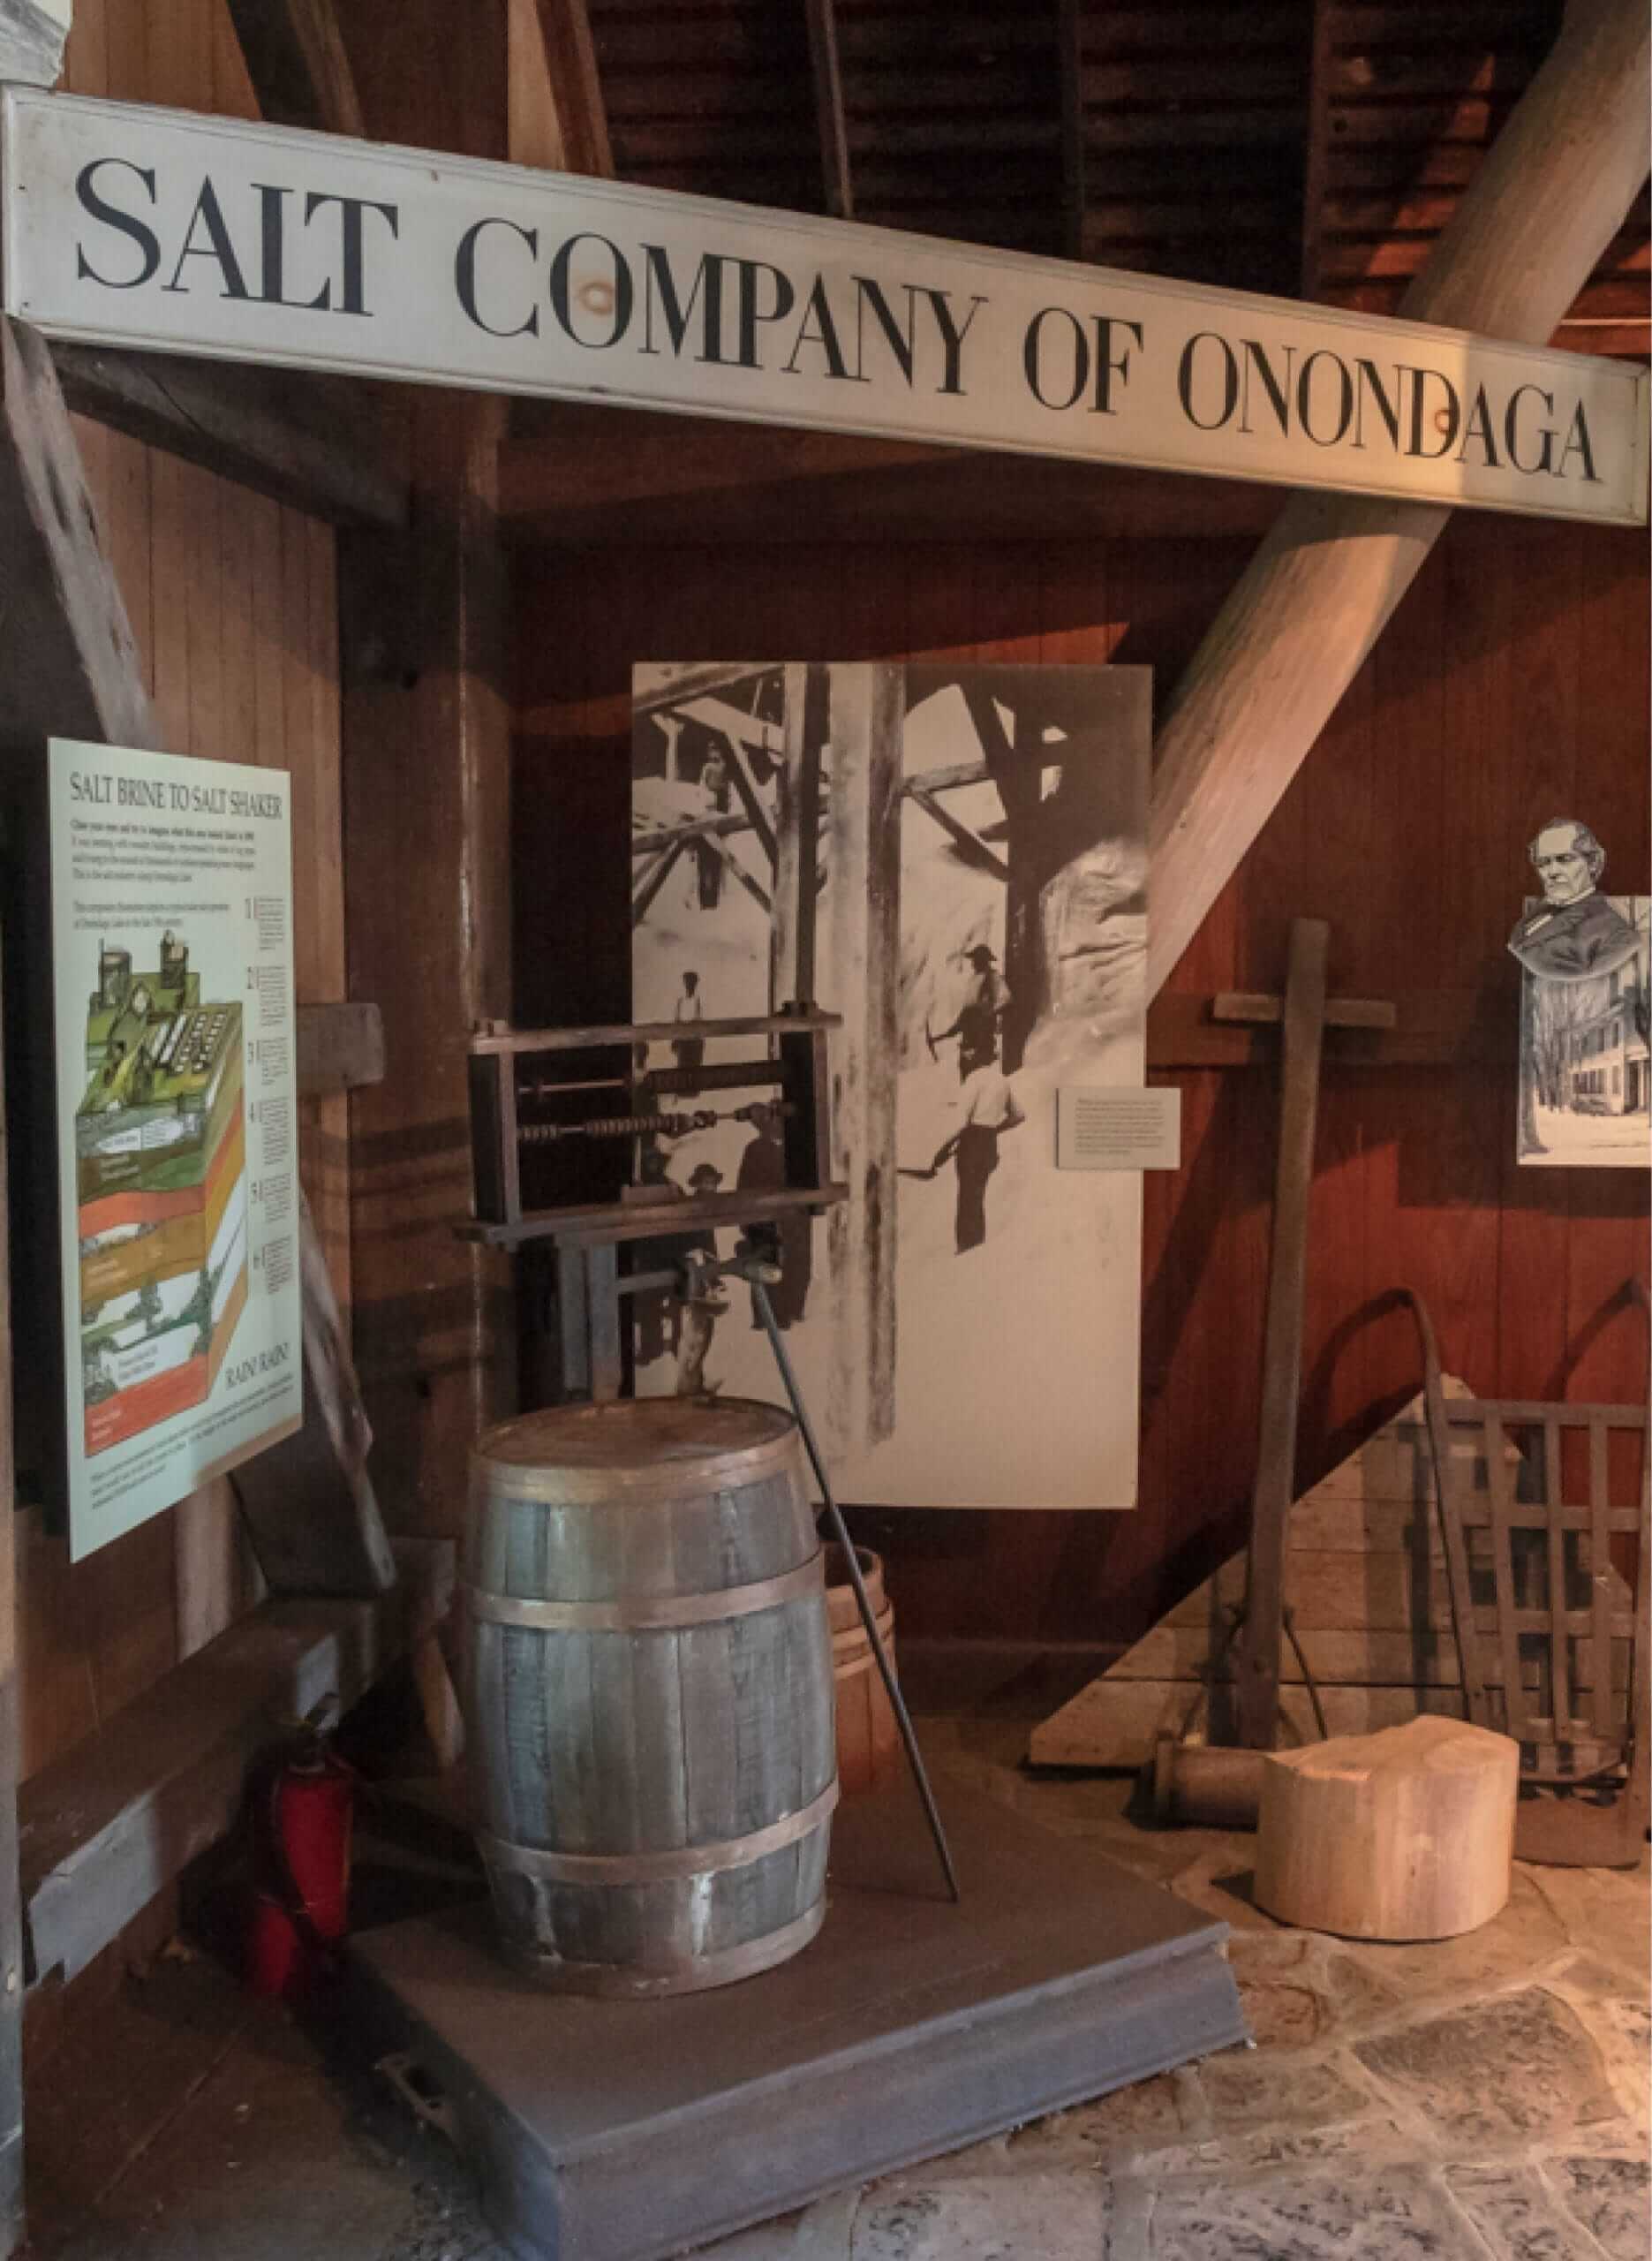 Get a fun history lesson at the Salt Museum